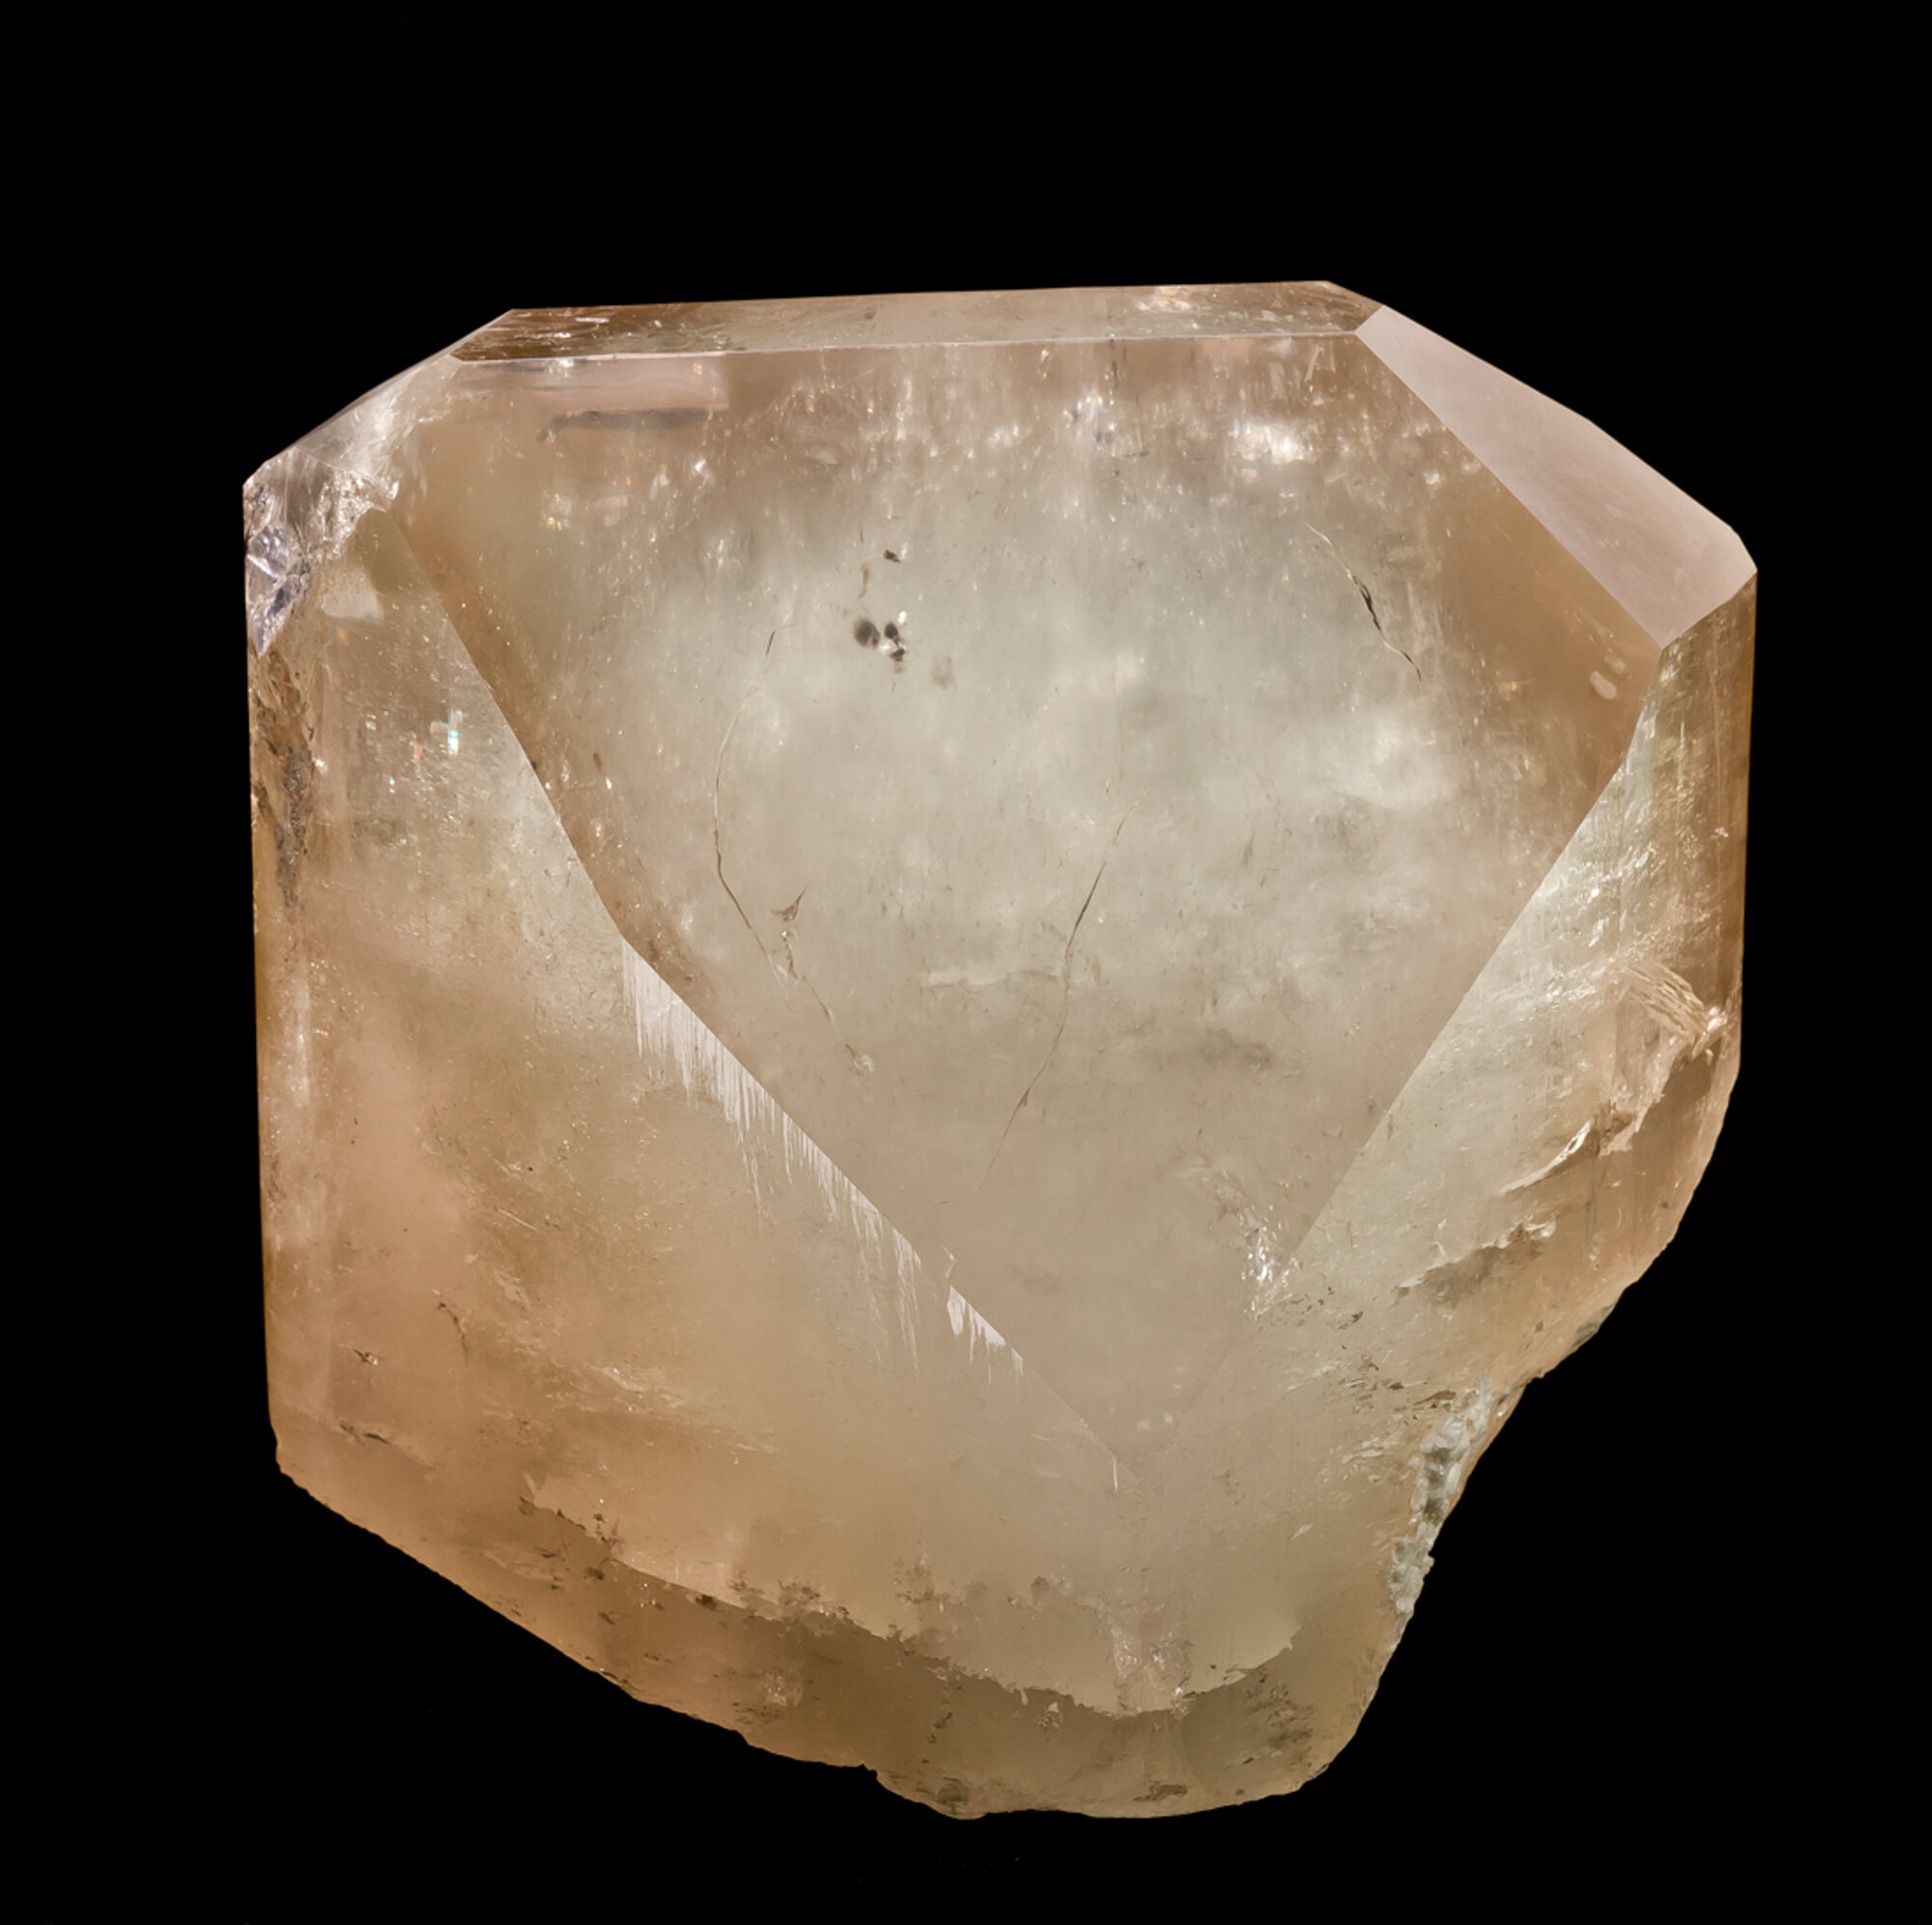  Topaz crystal, 21 cm (8 kg!), from the pegmatites along the Nu River, Gaoligong Mountains, Nujiang Prefecture, Yunnan Province, China. 